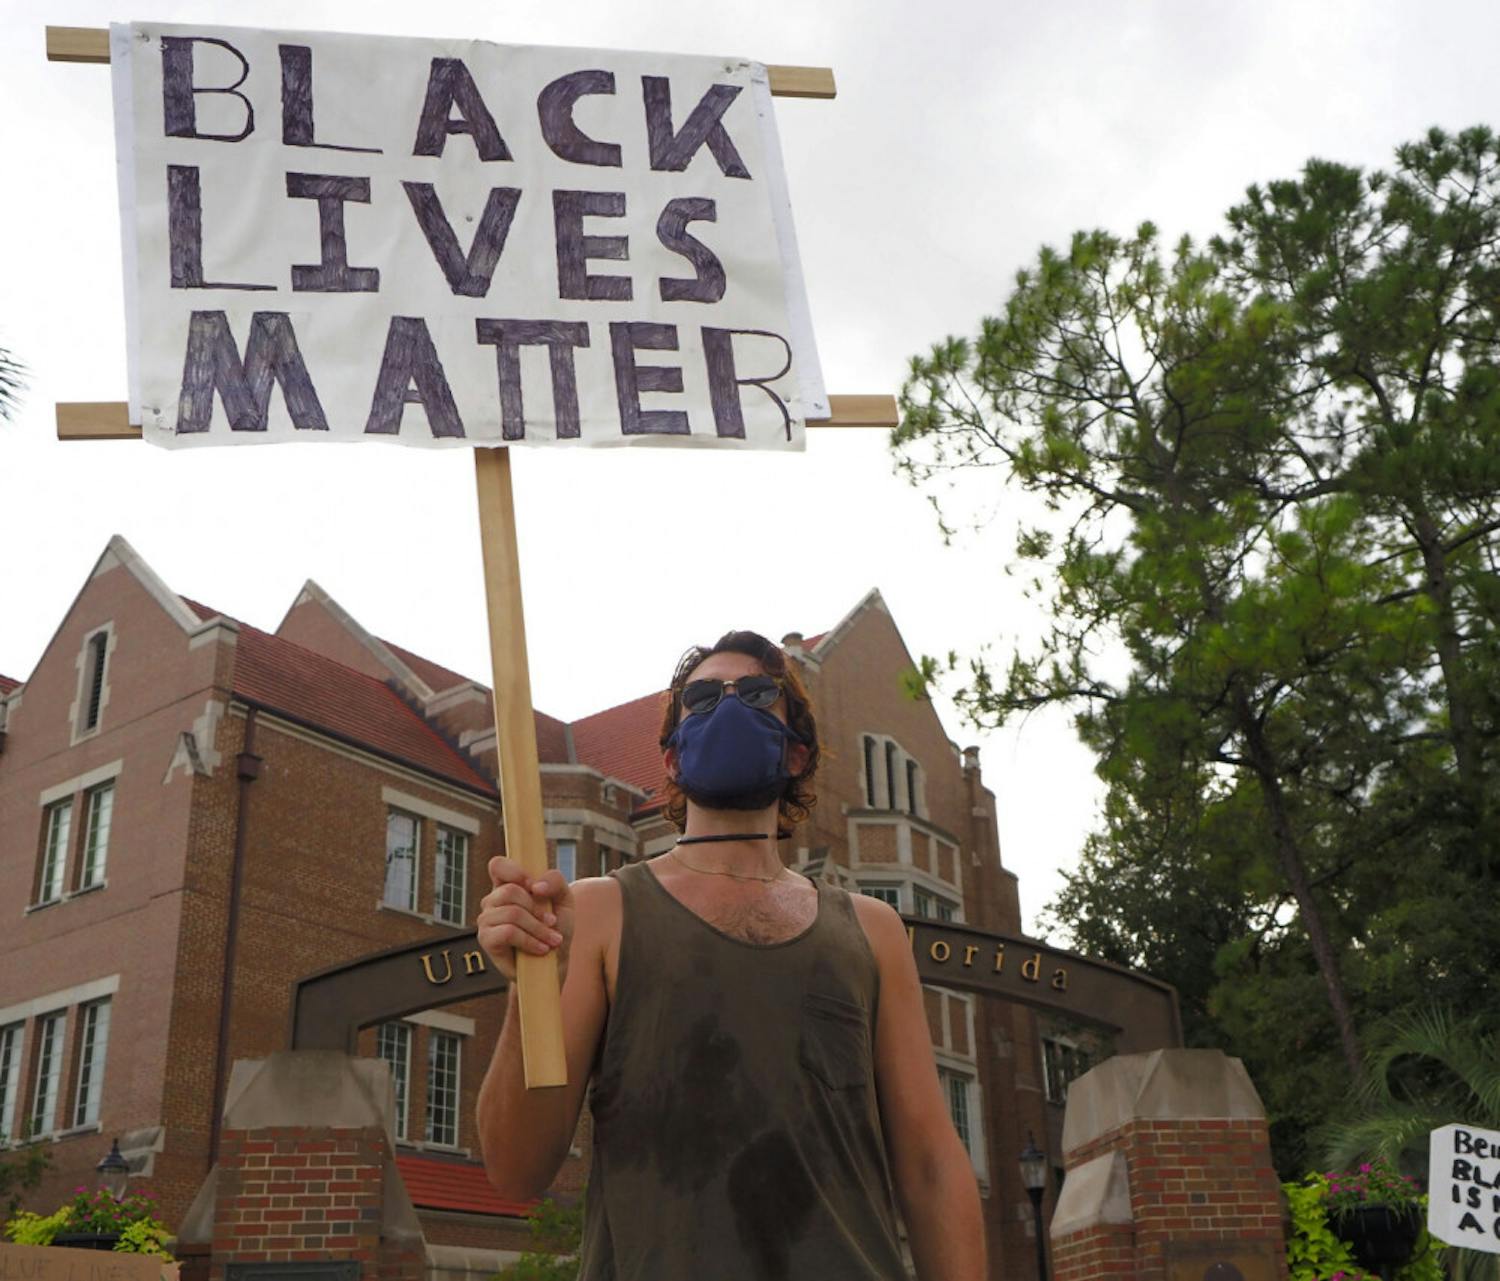 More than 200 masked people gathered Friday evening at the intersection of University Avenue and 13th Street and marched downtown to Bo Diddley Community Plaza to protest the shooting of 29-year-old Jacob Blake, a Black man shot by police while entering his car after he was tased.
Follow the tweets posted by The Alligator's staff live from the protest.